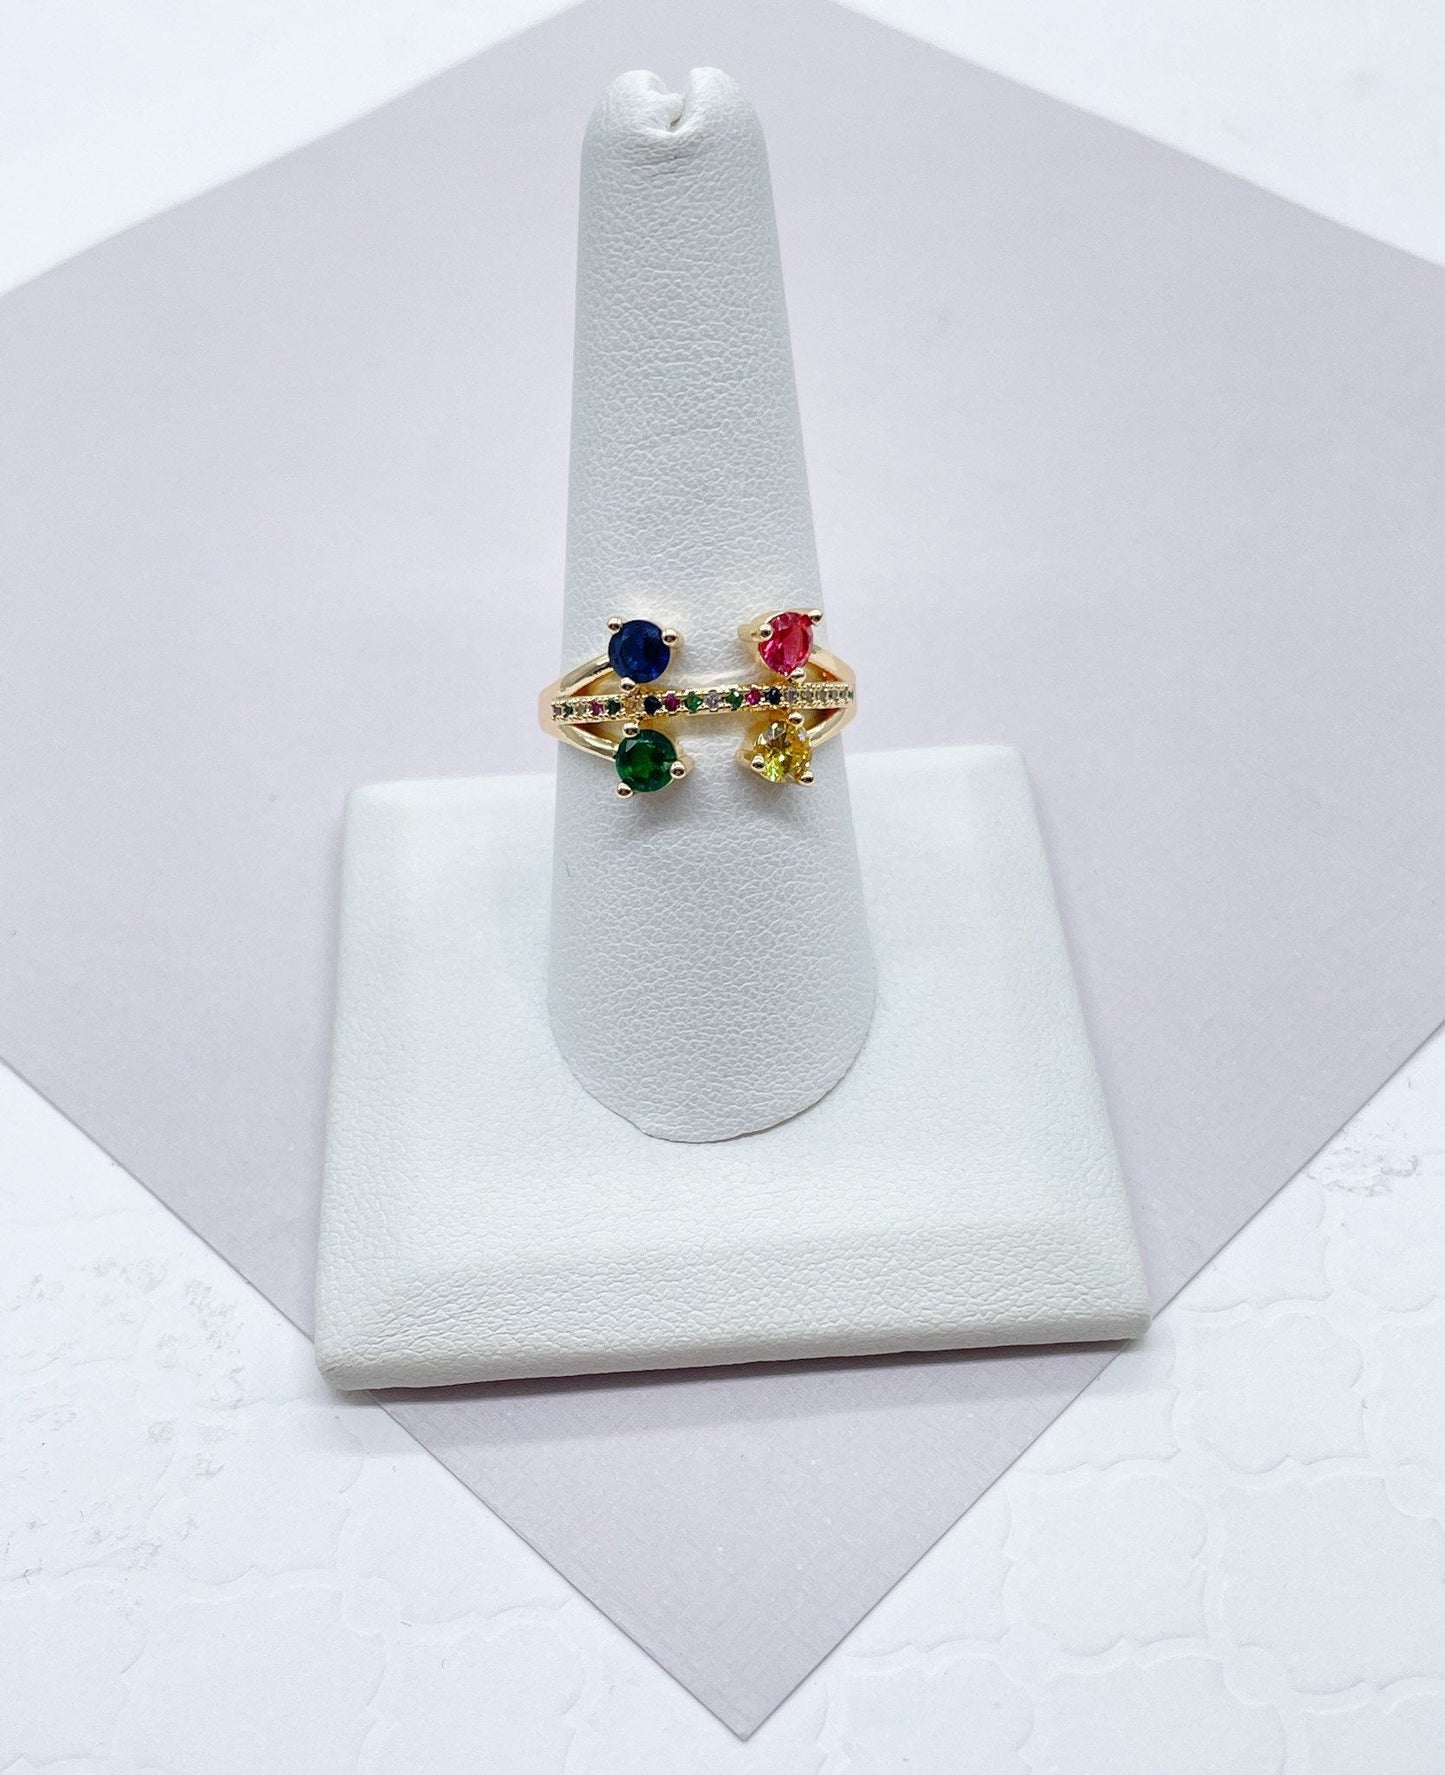 18k Gold Layered Pink, Blue, Yellow and Green Color Cubic Zirconia Stones Ring